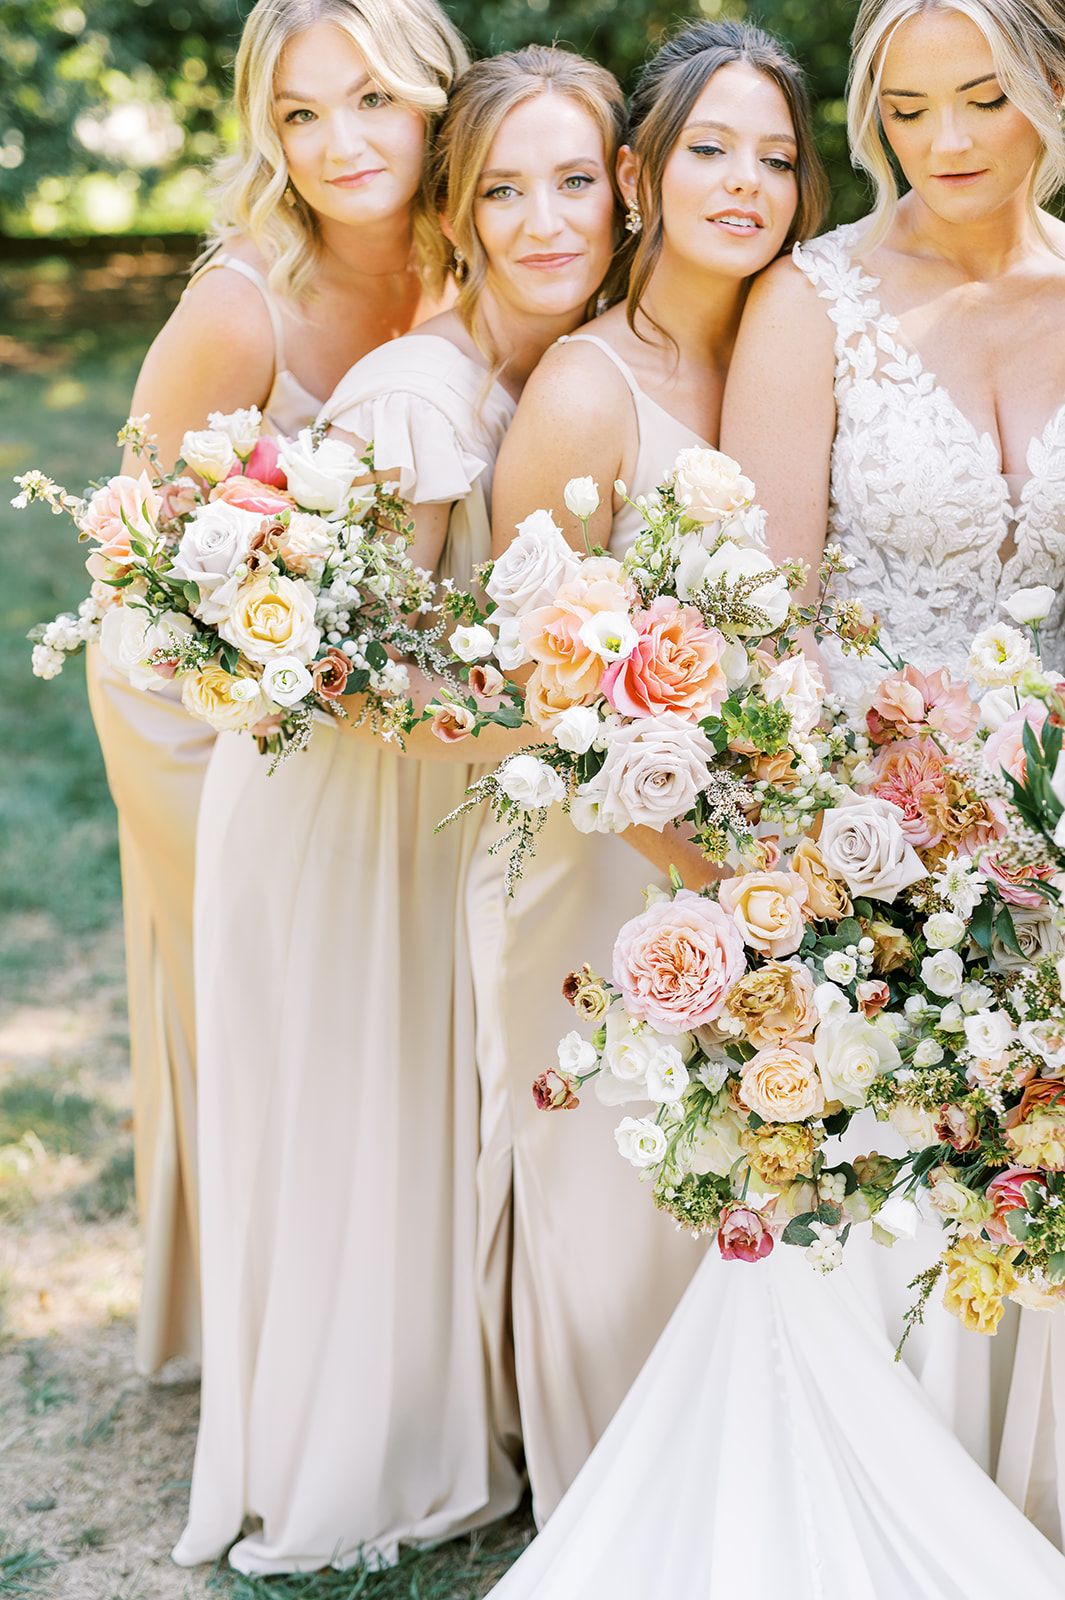 luxury moment of bridesmaids champagne dresses huddled together with lush pink autumn bouquets greenville country club